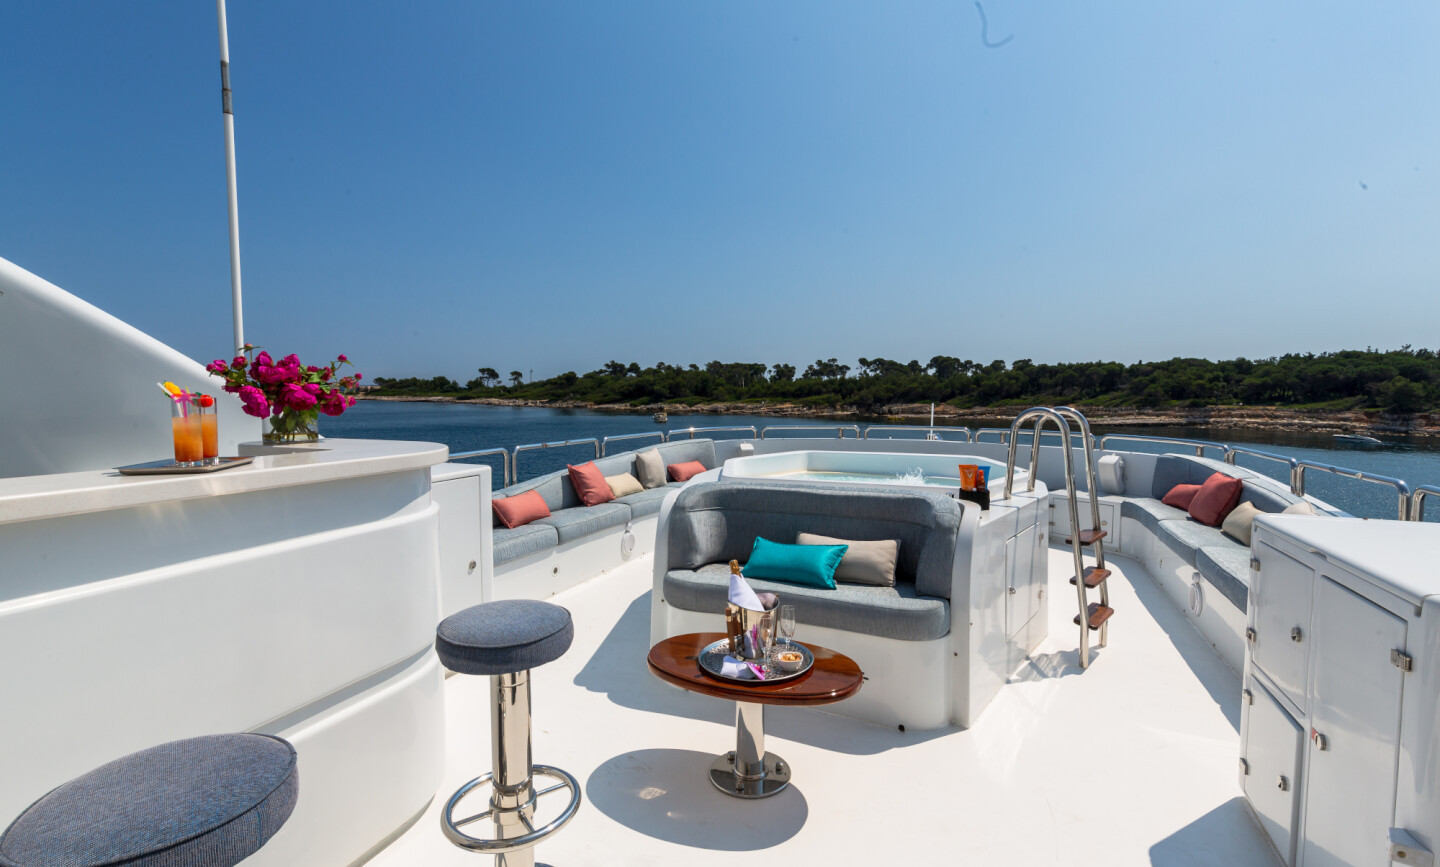 DXB yacht for Charter 2